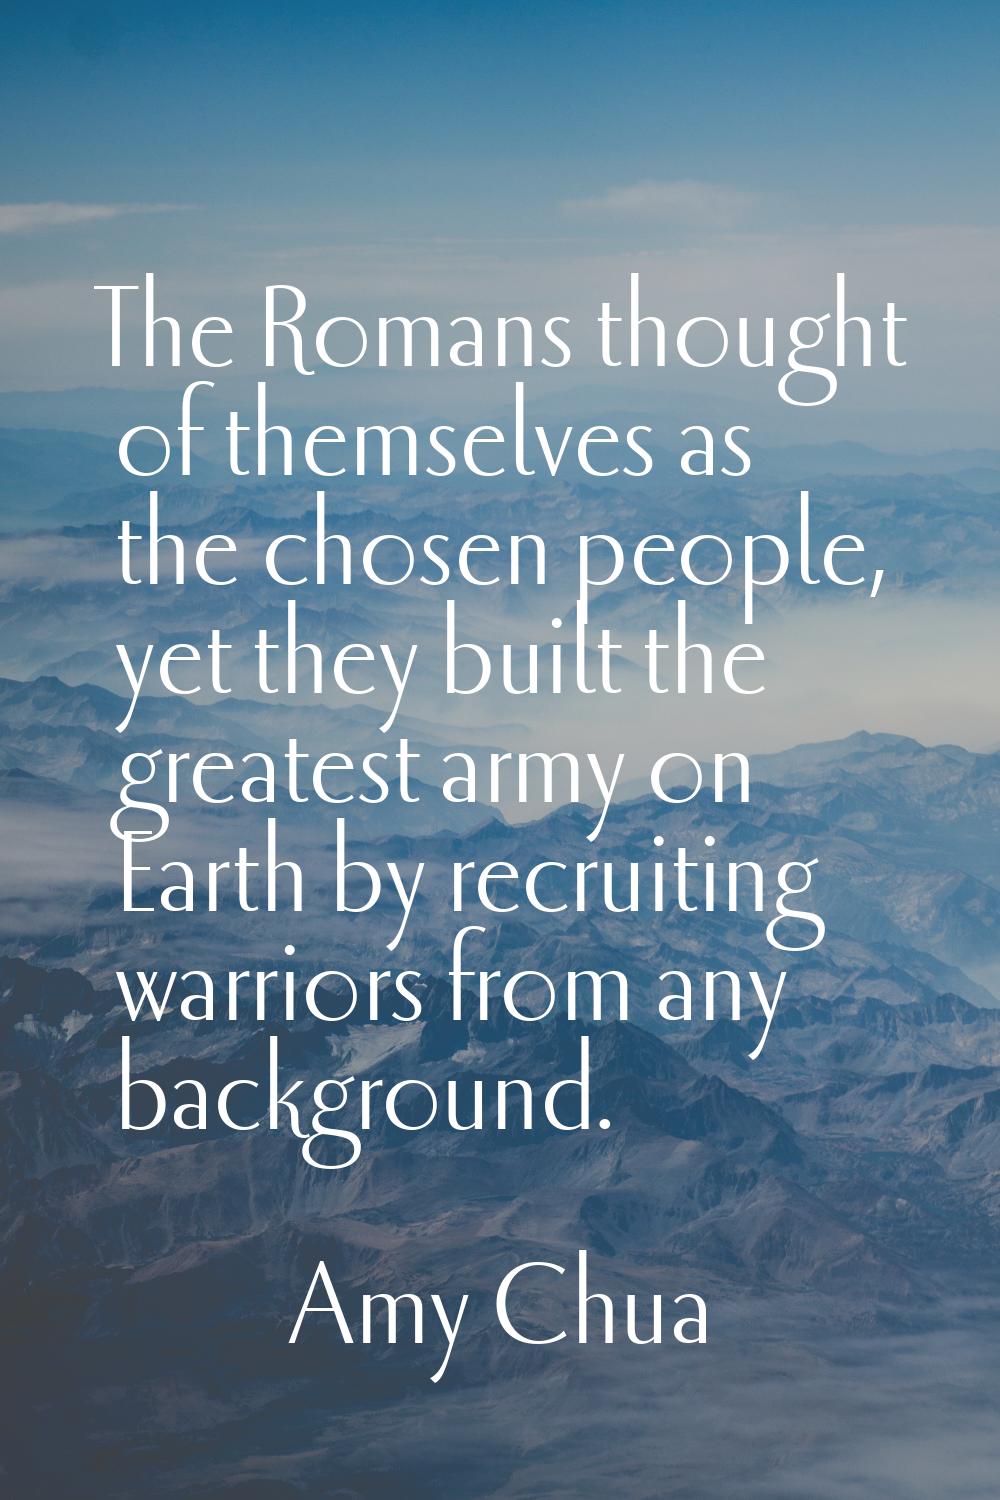 The Romans thought of themselves as the chosen people, yet they built the greatest army on Earth by